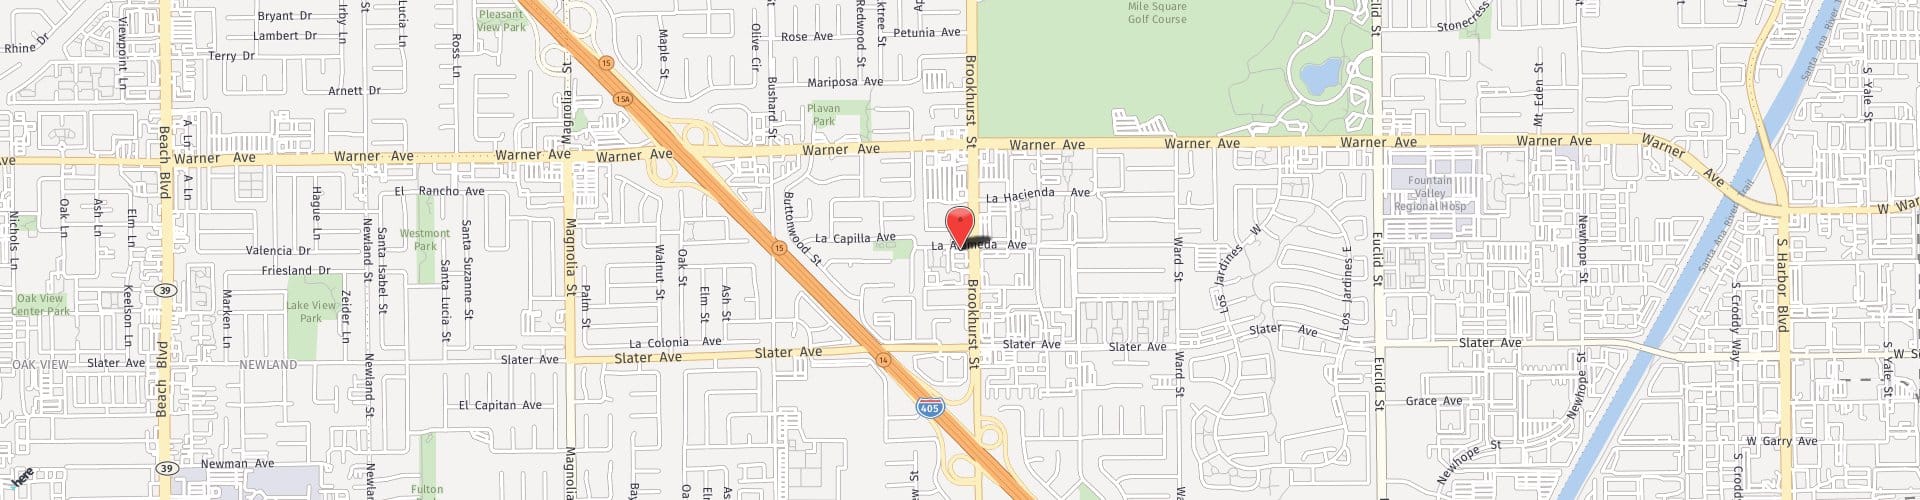 Location Map: 17271 Brookhurst St. Fountain Valley, CA 92708